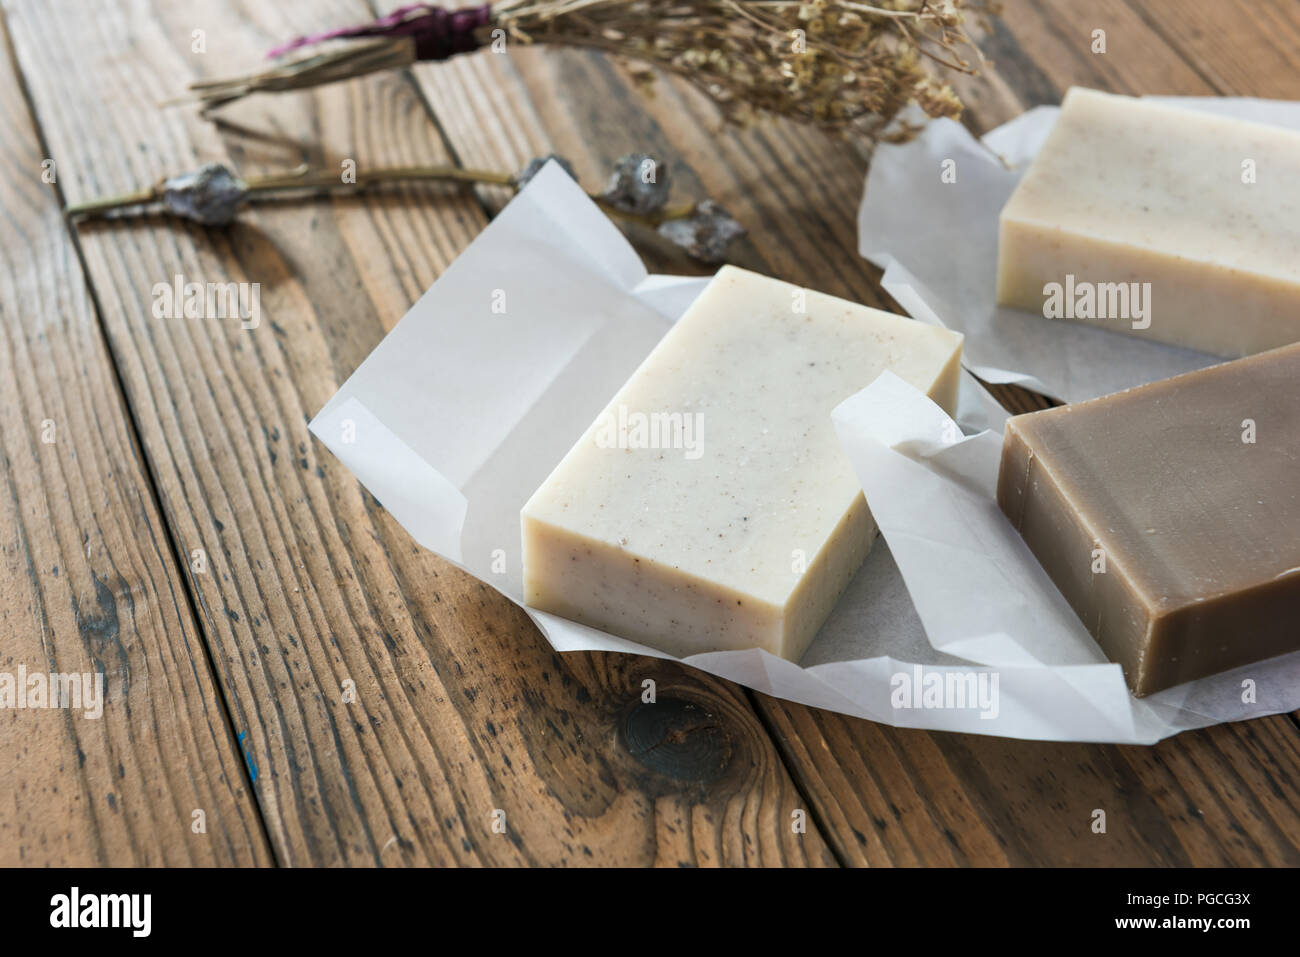 Natural Handmade Soap Wood Herbs Color Photo Background And